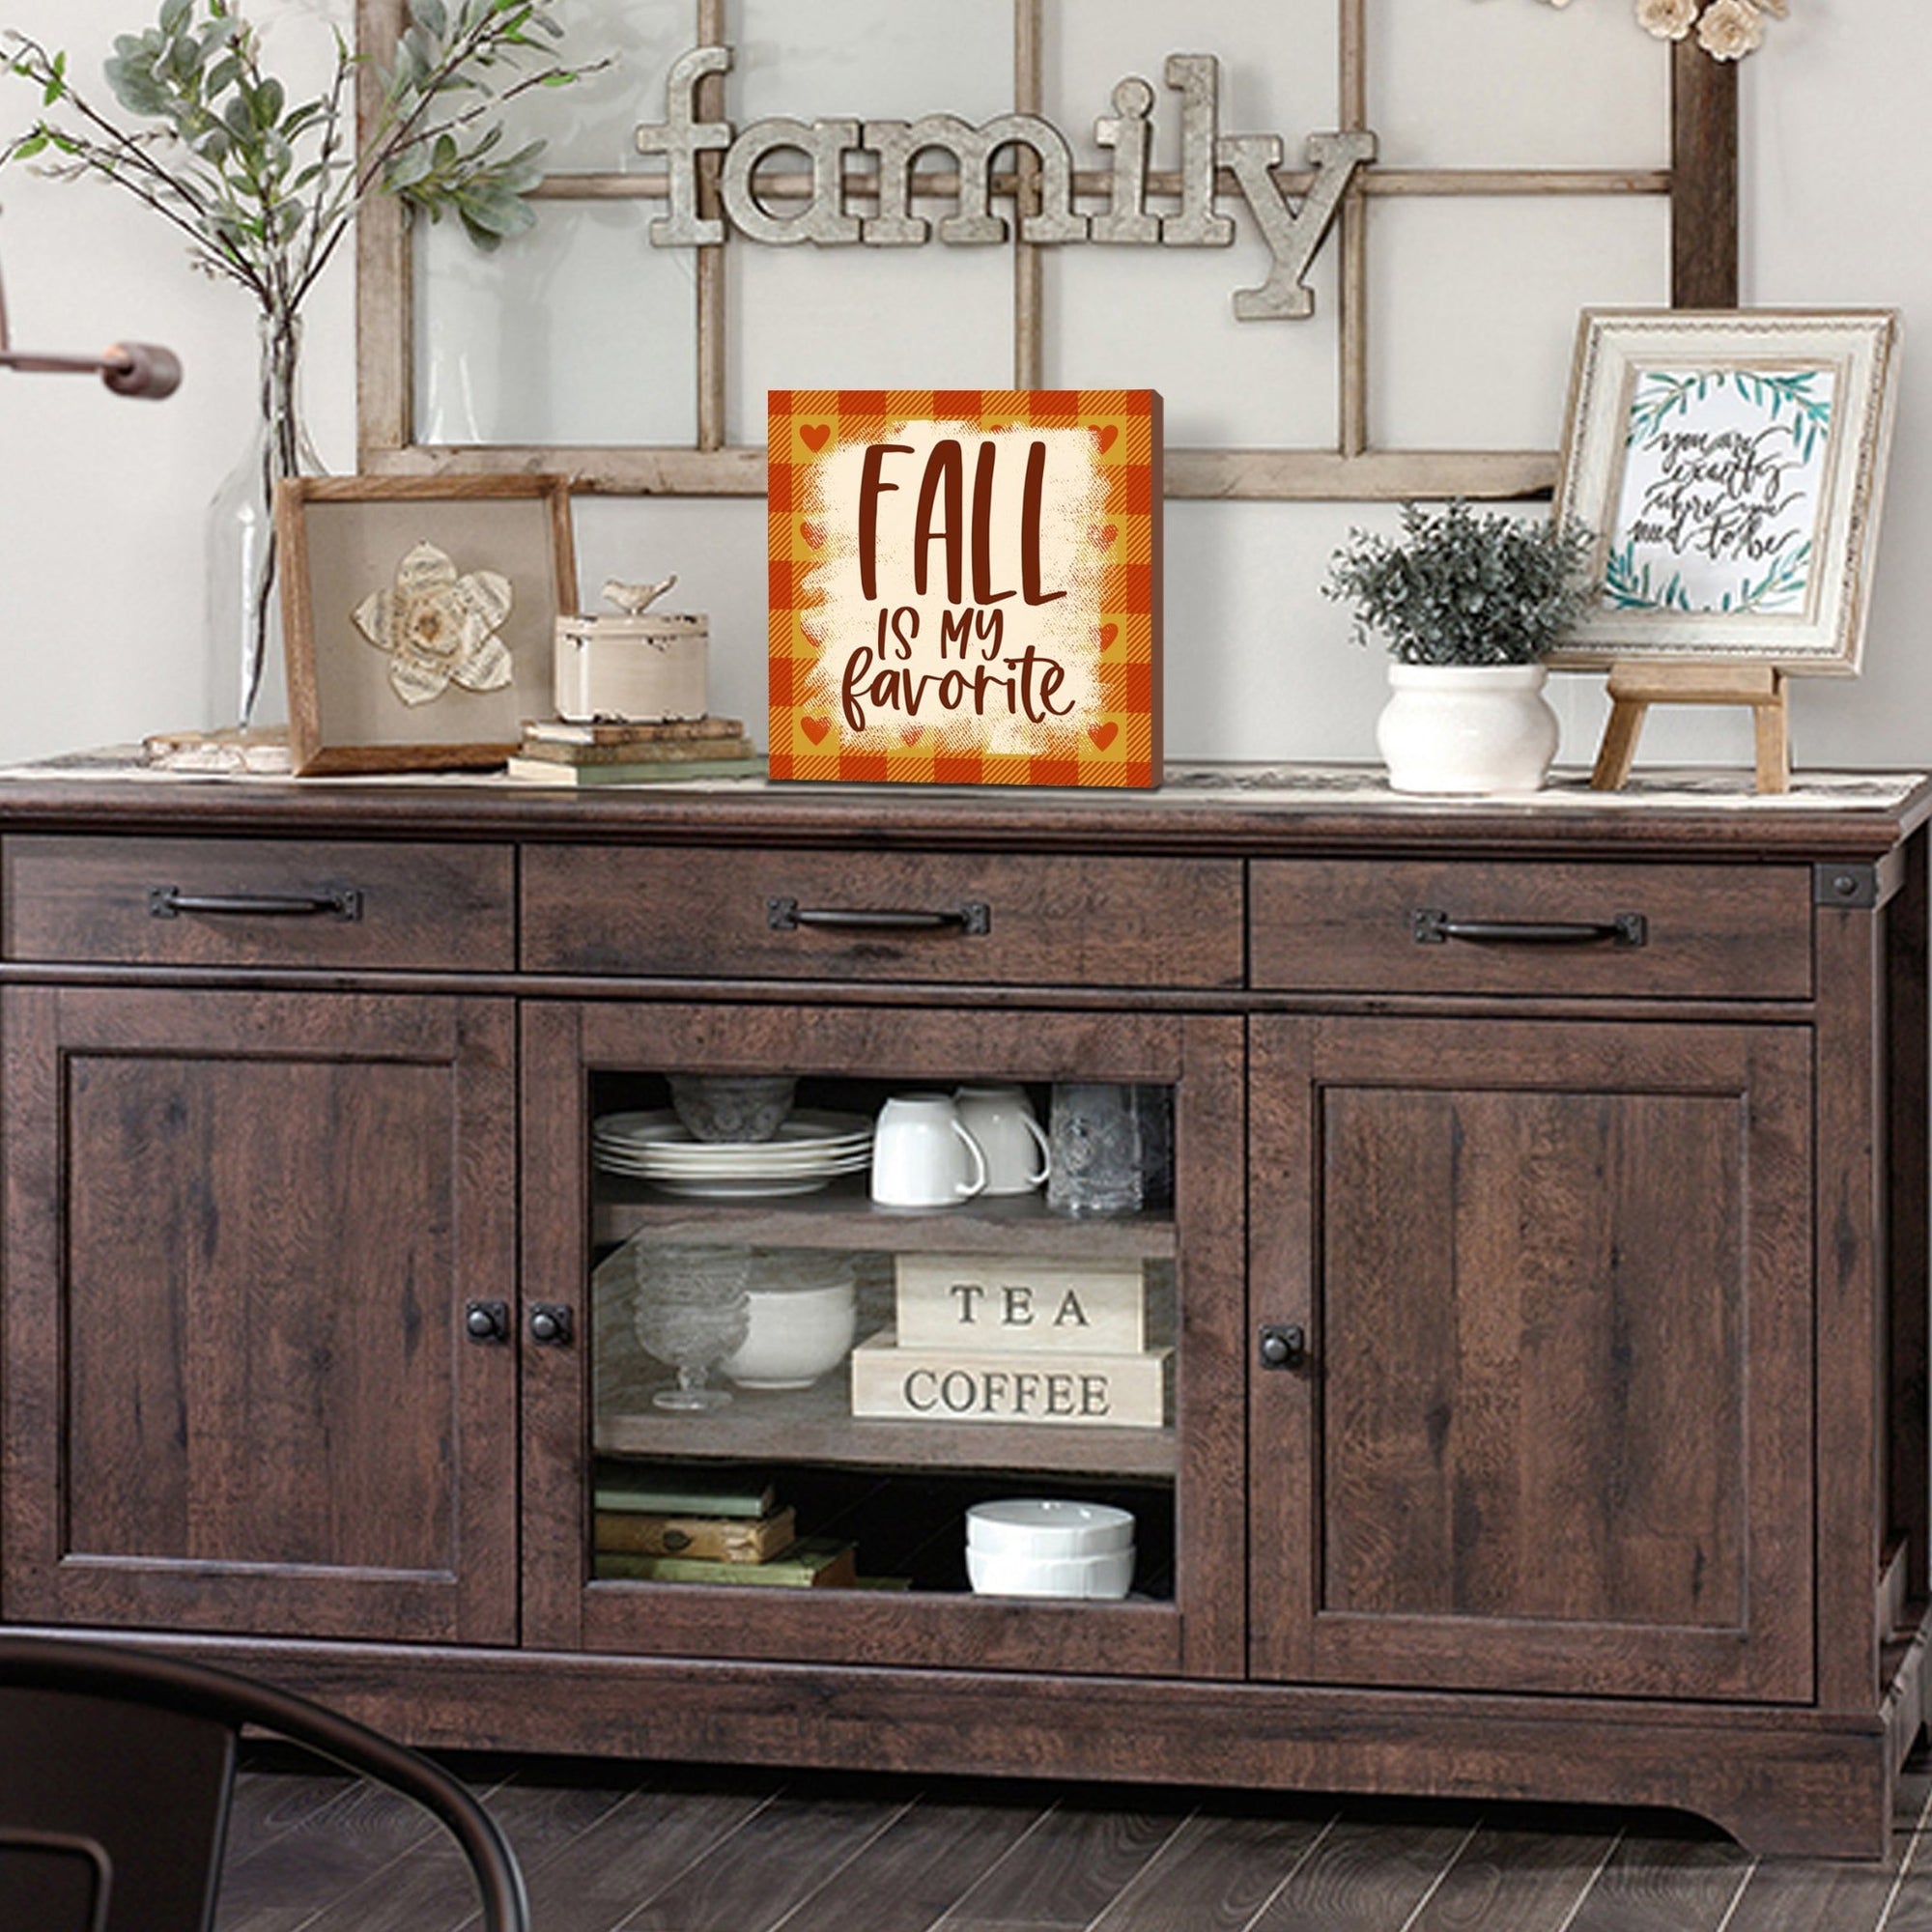 Fall tabletop decor that adds warmth and character to your living space, mixing modern and rustic elements